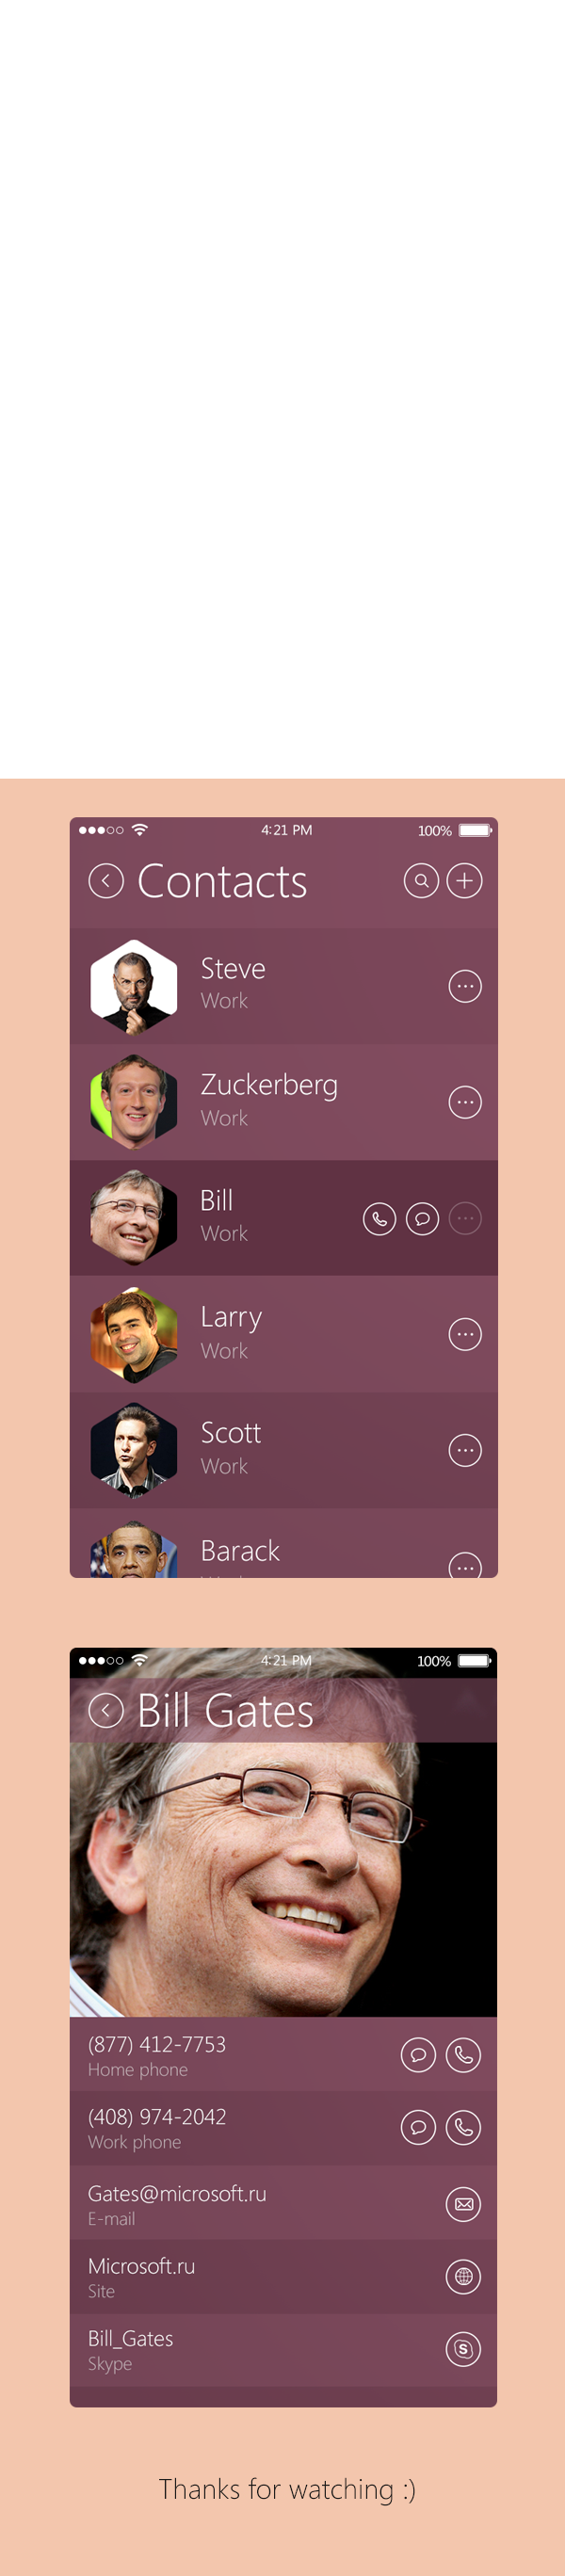 Concept address book in iOS 8